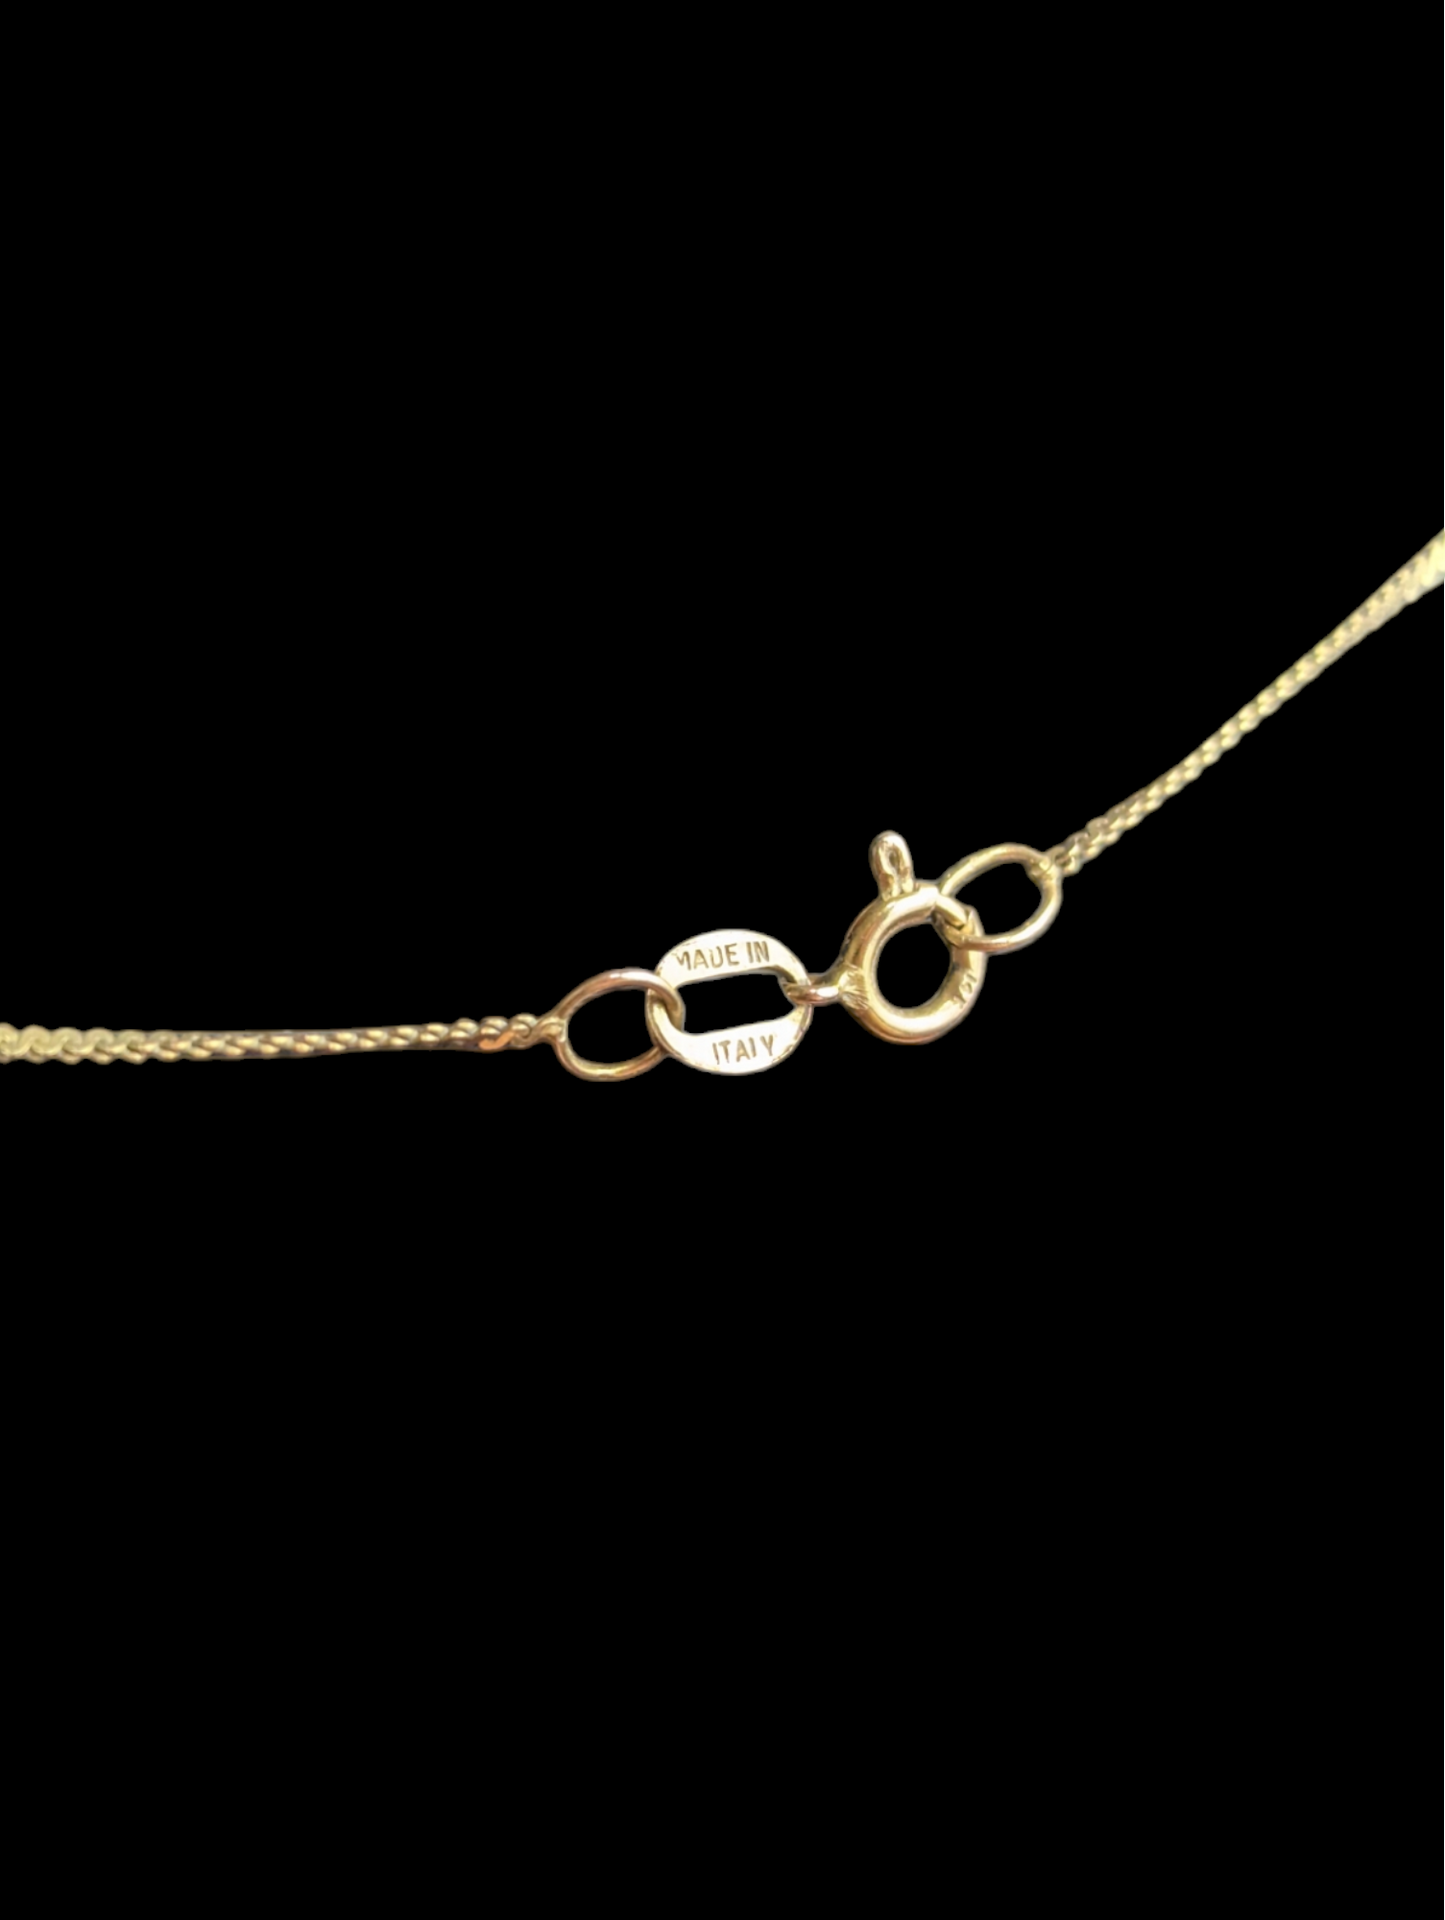 Vintage 14k Serpentine S Link Gold Delicate Chain Necklace Made in Italy